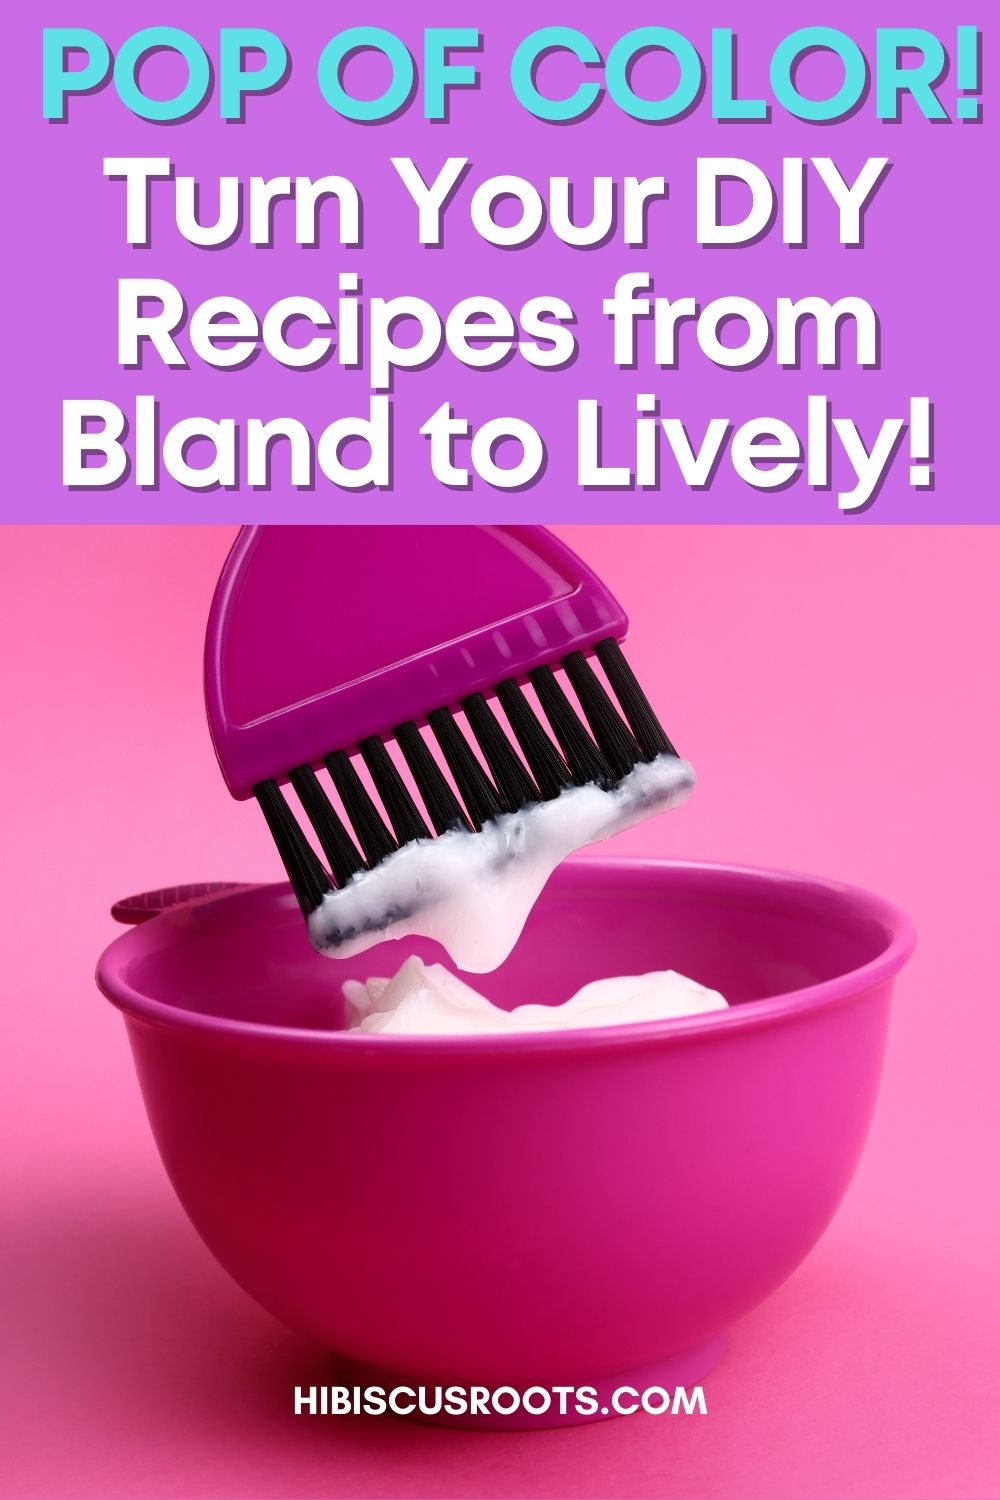 Your DIY Natural Hair Recipes NEED this Pop of Color!